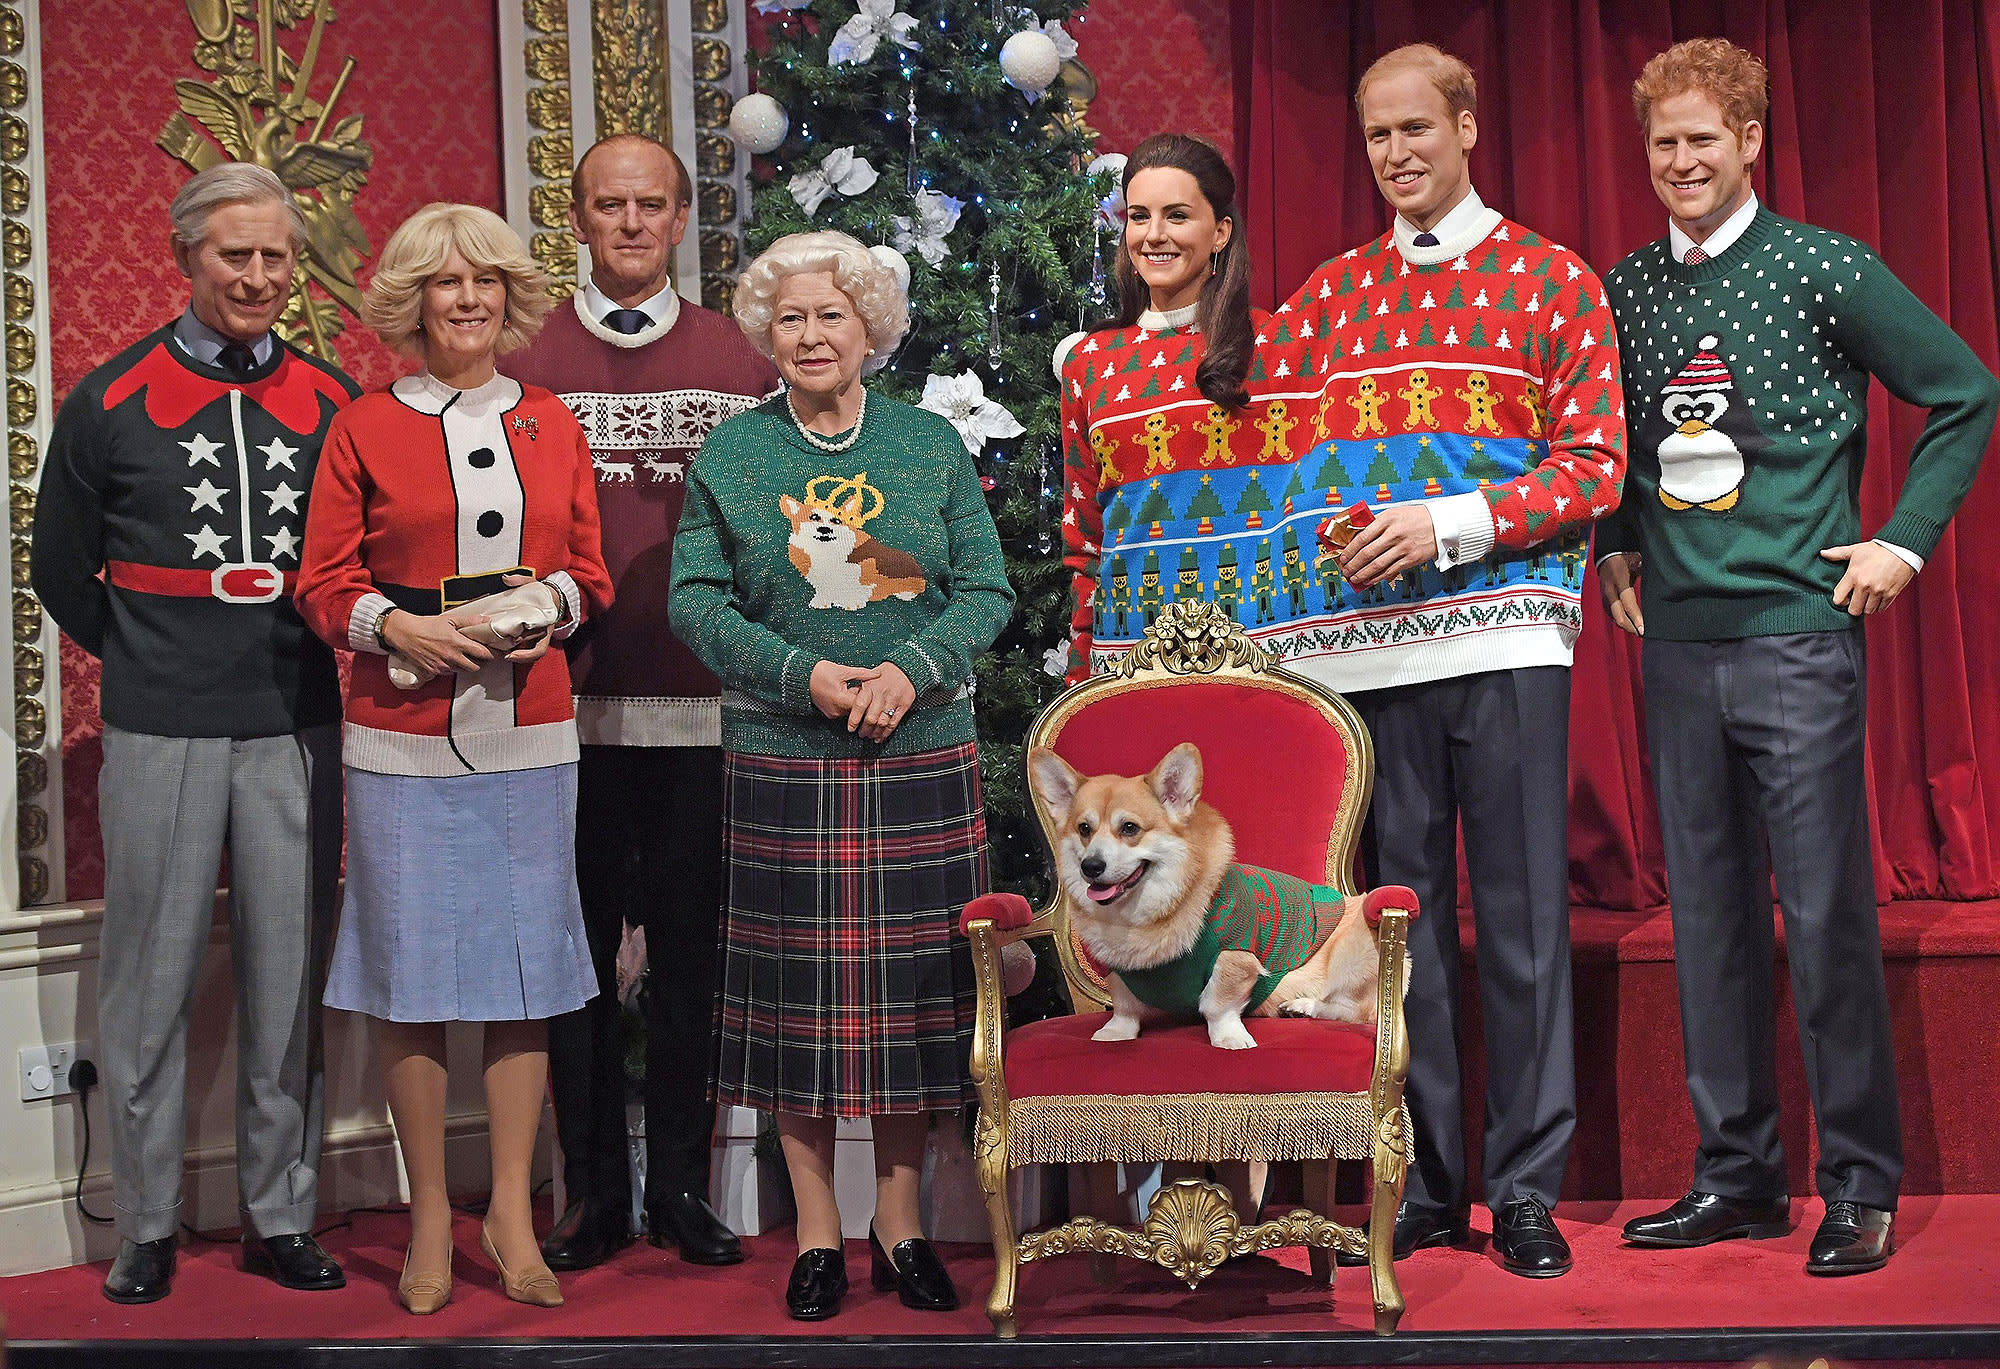 See Prince William, Princess Kate and the Rest of the Royal Family in Their Tacky Christmas Sweaters! - Yahoo News